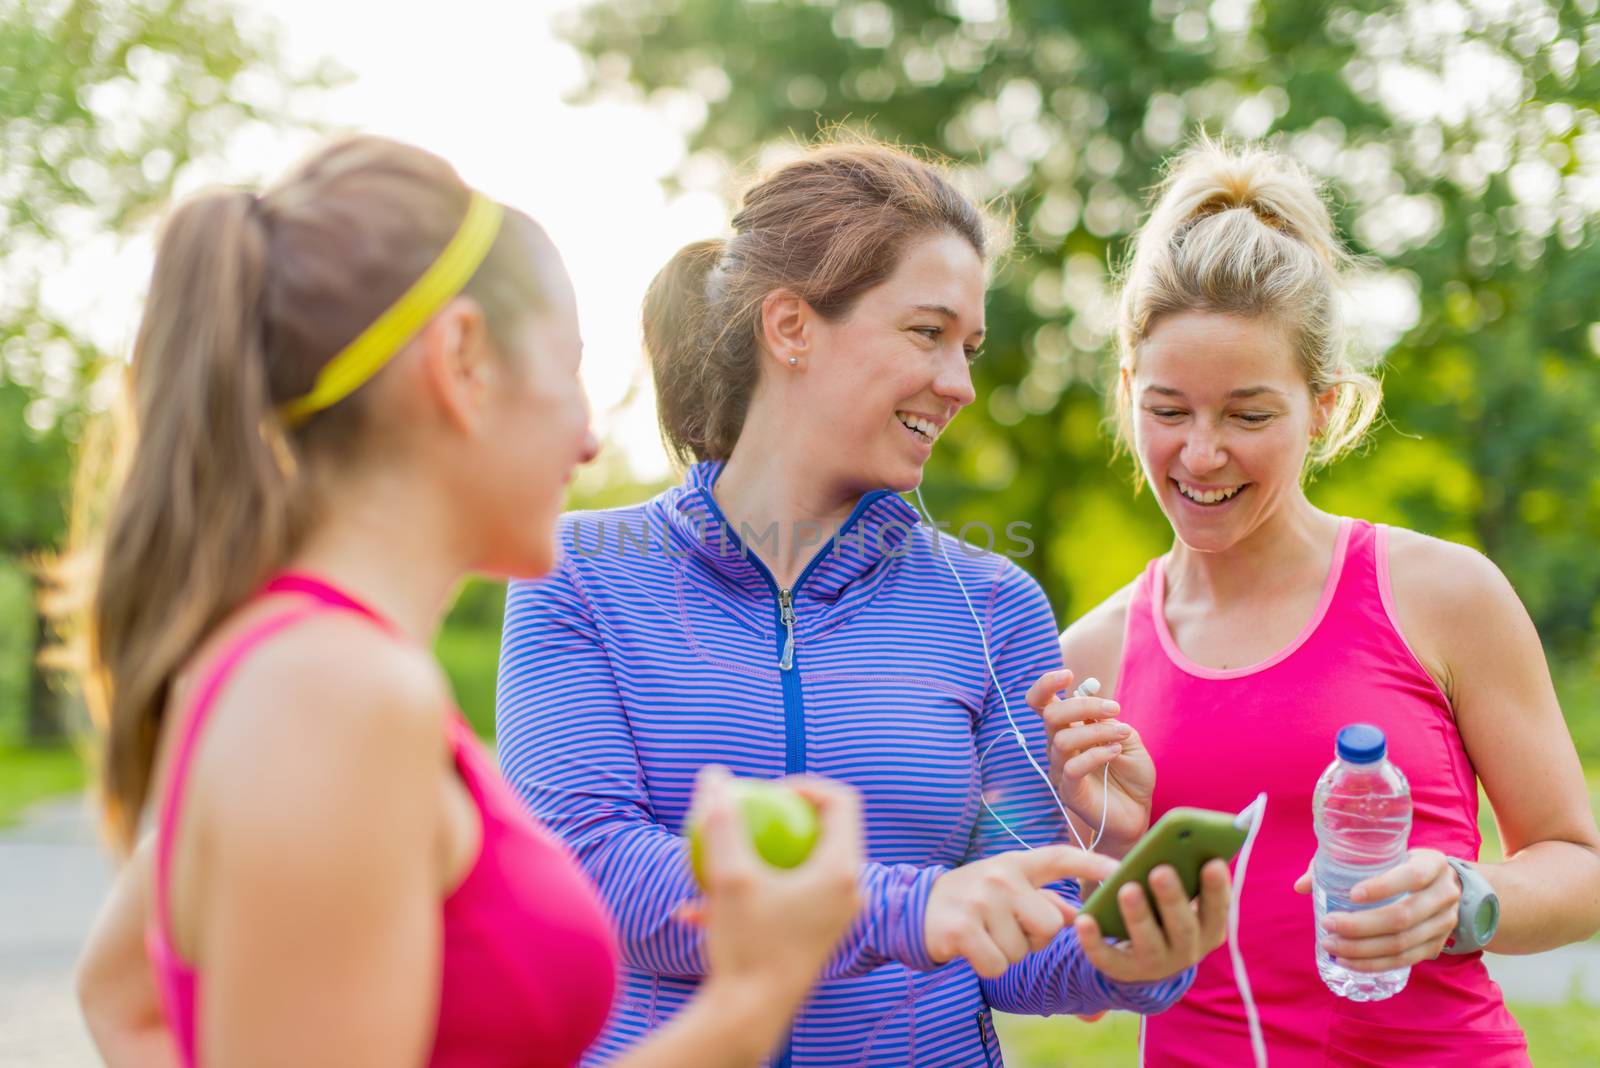 Group of happy active girls preparing for a run in nature by choosing music on smart phone